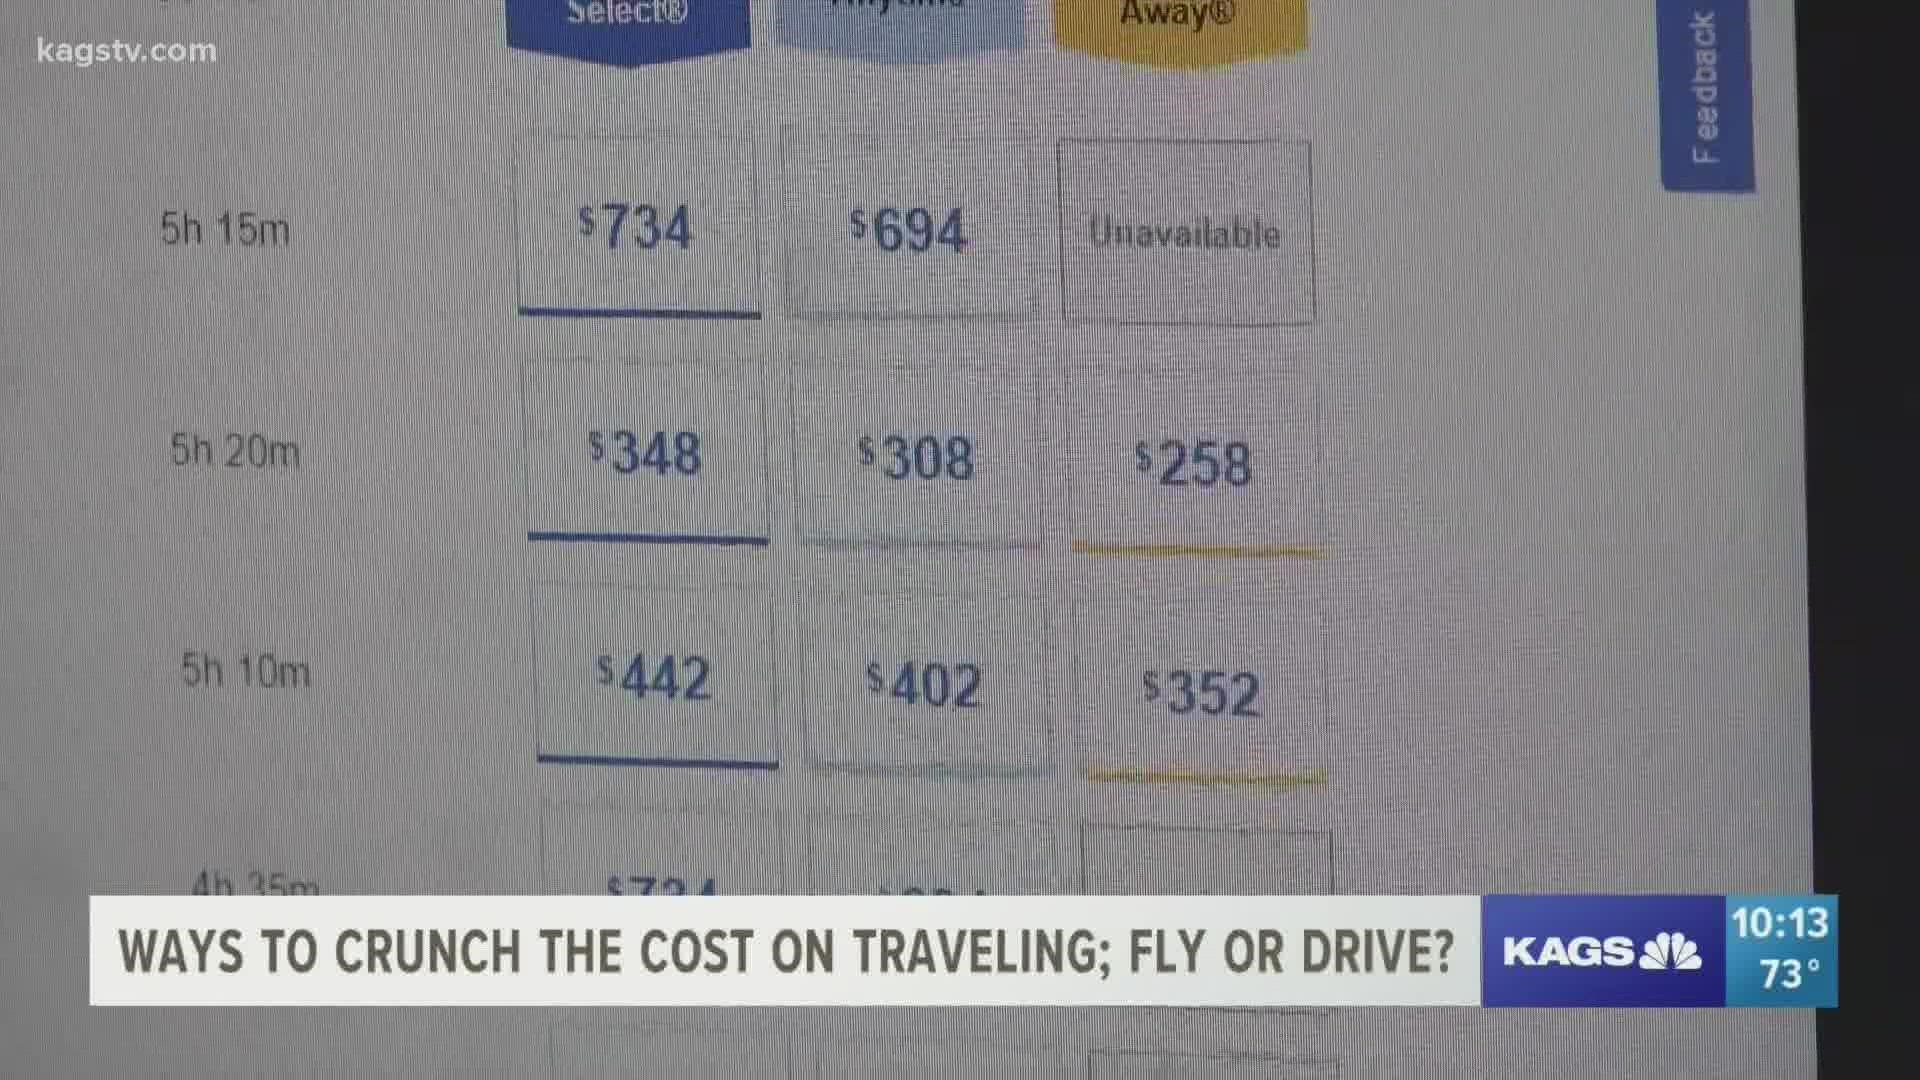 When should you buy your airline ticket? We crunch the numbers in driving vs. flying.